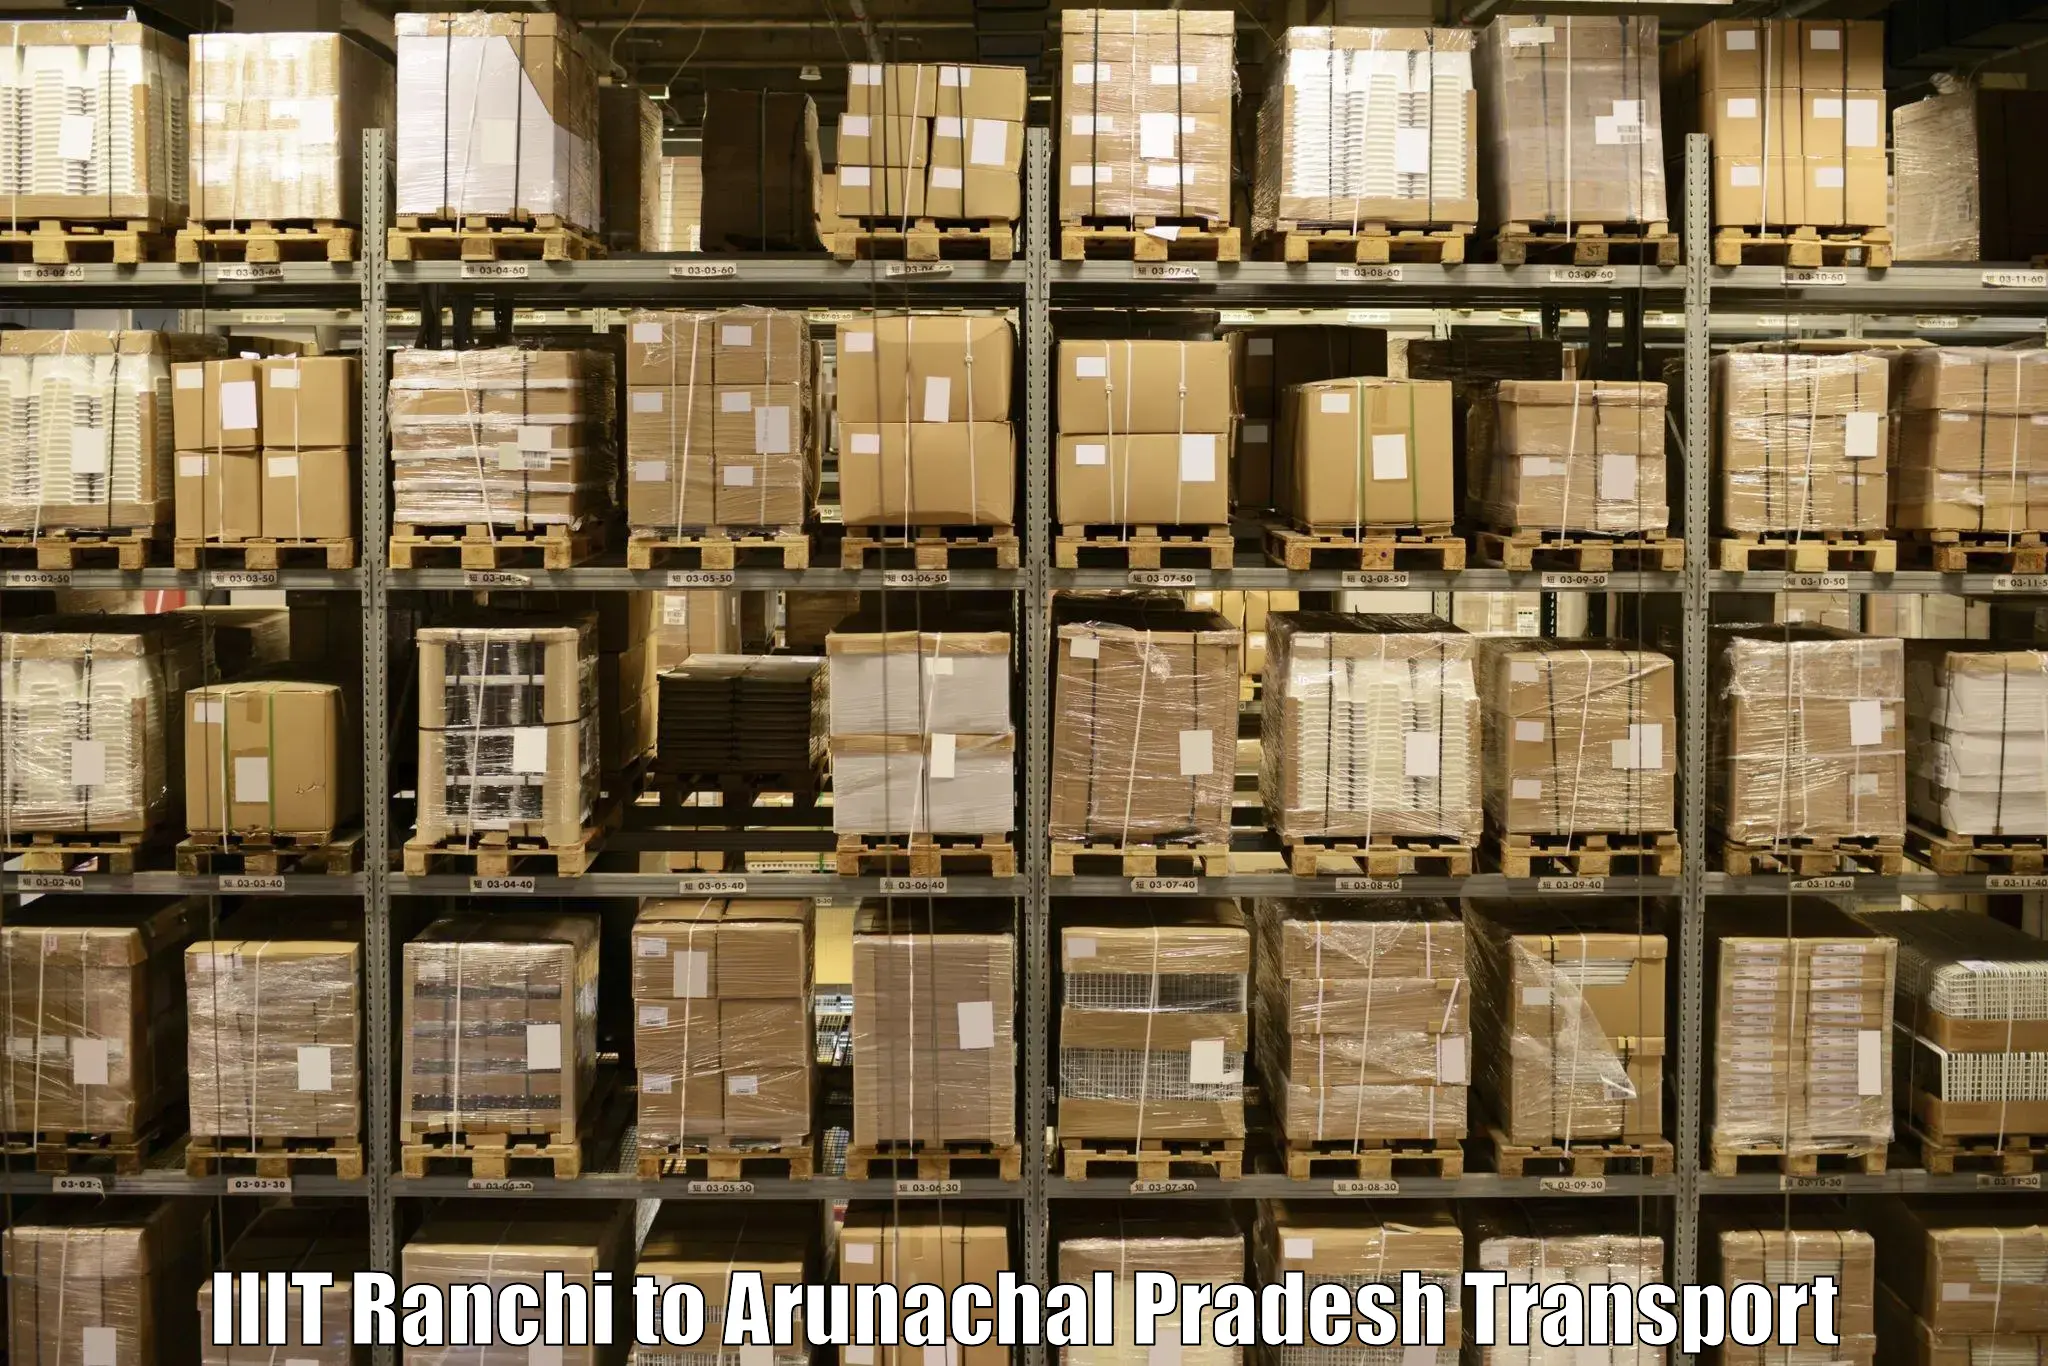 Domestic transport services in IIIT Ranchi to Lower Subansiri